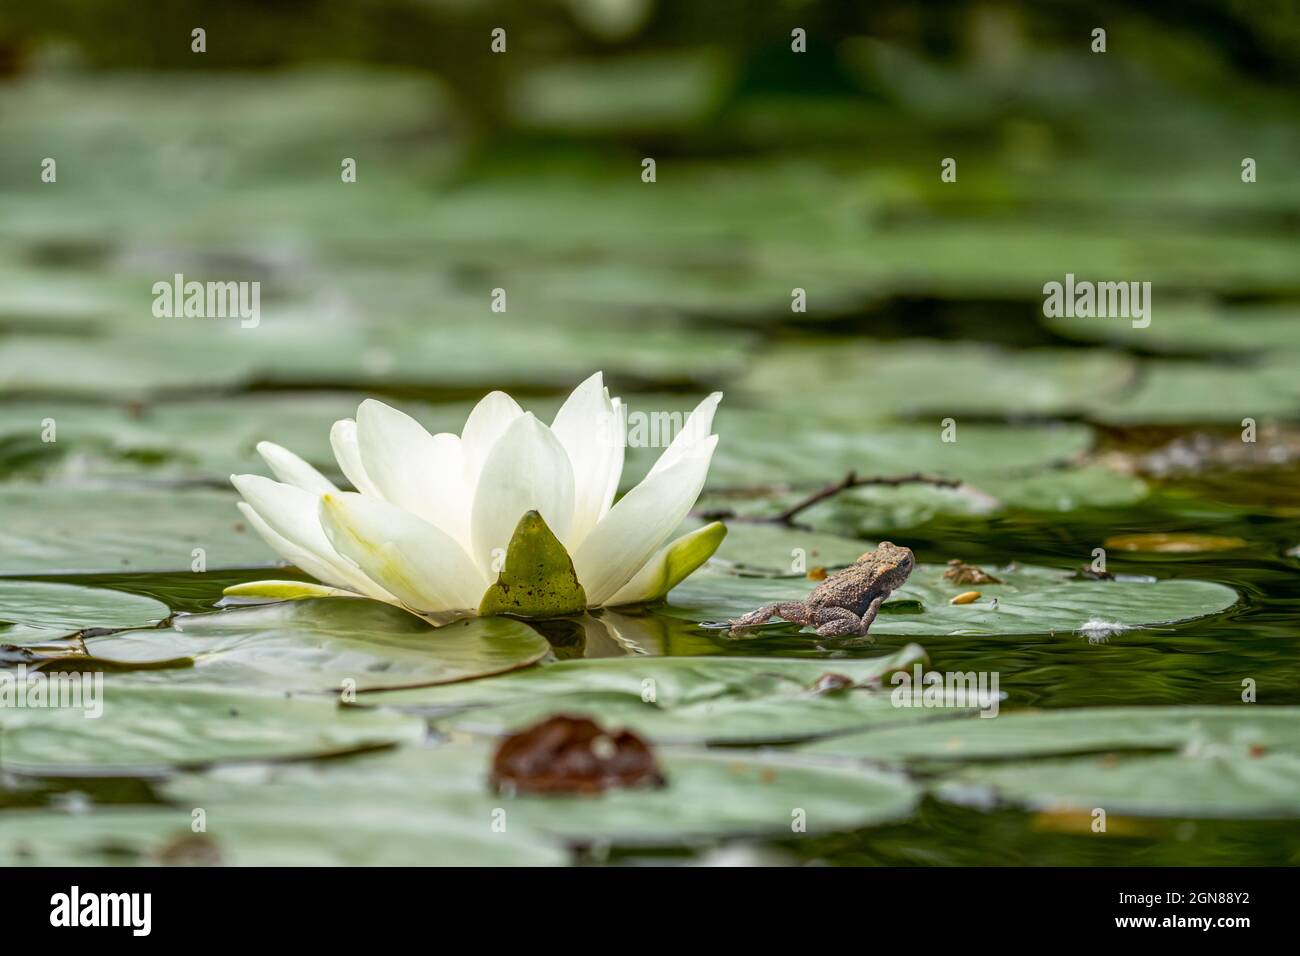 selective focus of a young Toad climbing up onto a lily pad with white flower on a pond Stock Photo